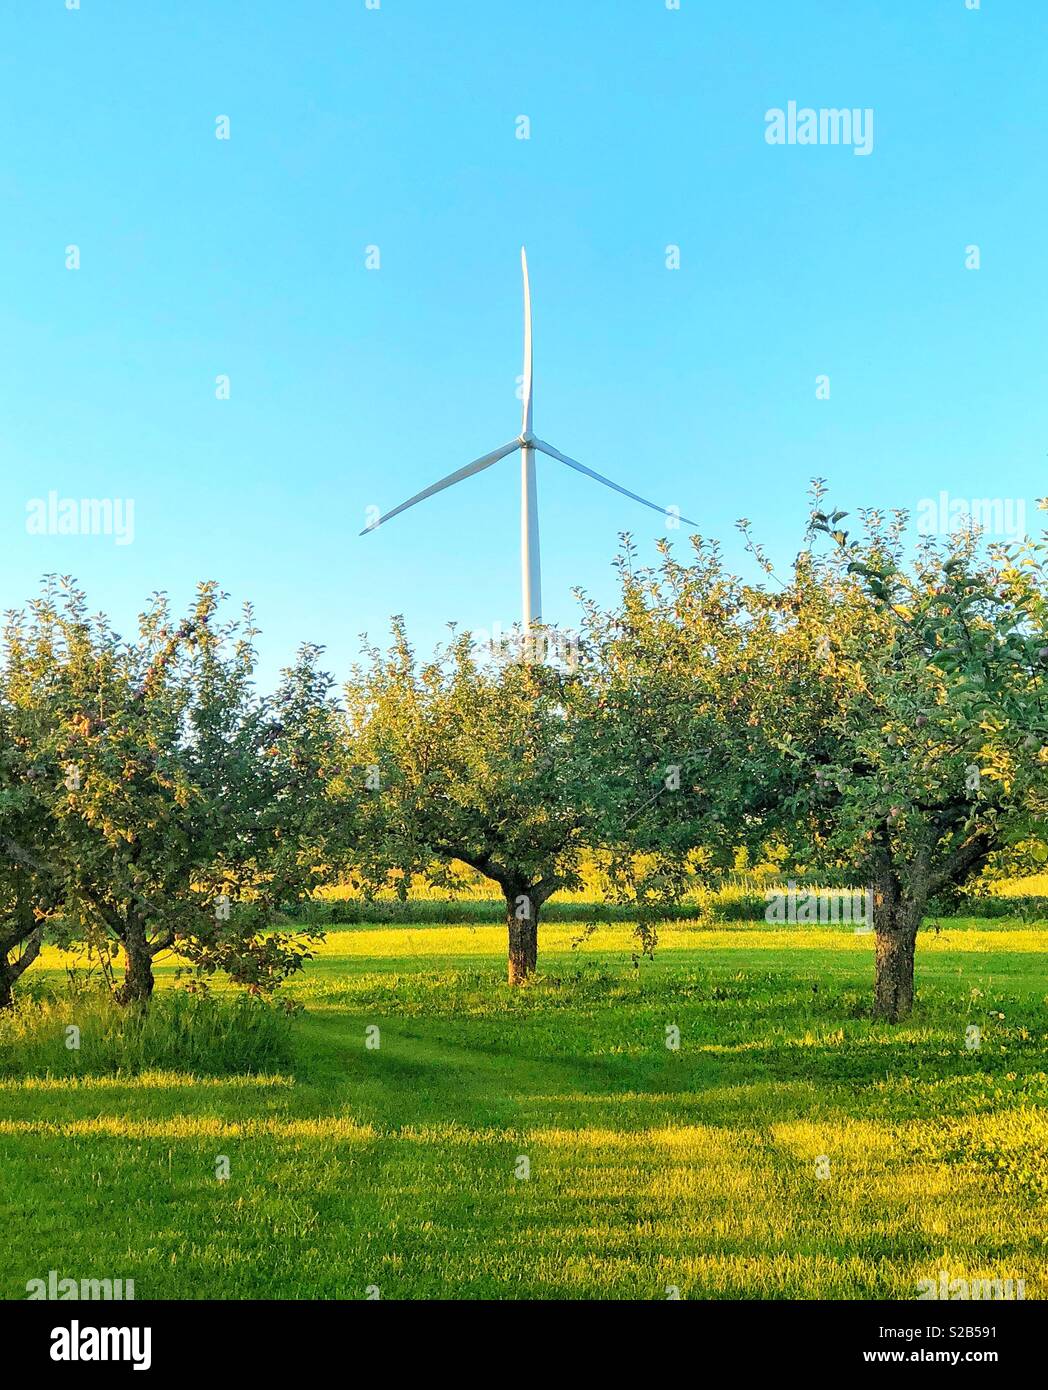 Apple orchard on sunny day with single wind turbine in background Stock Photo